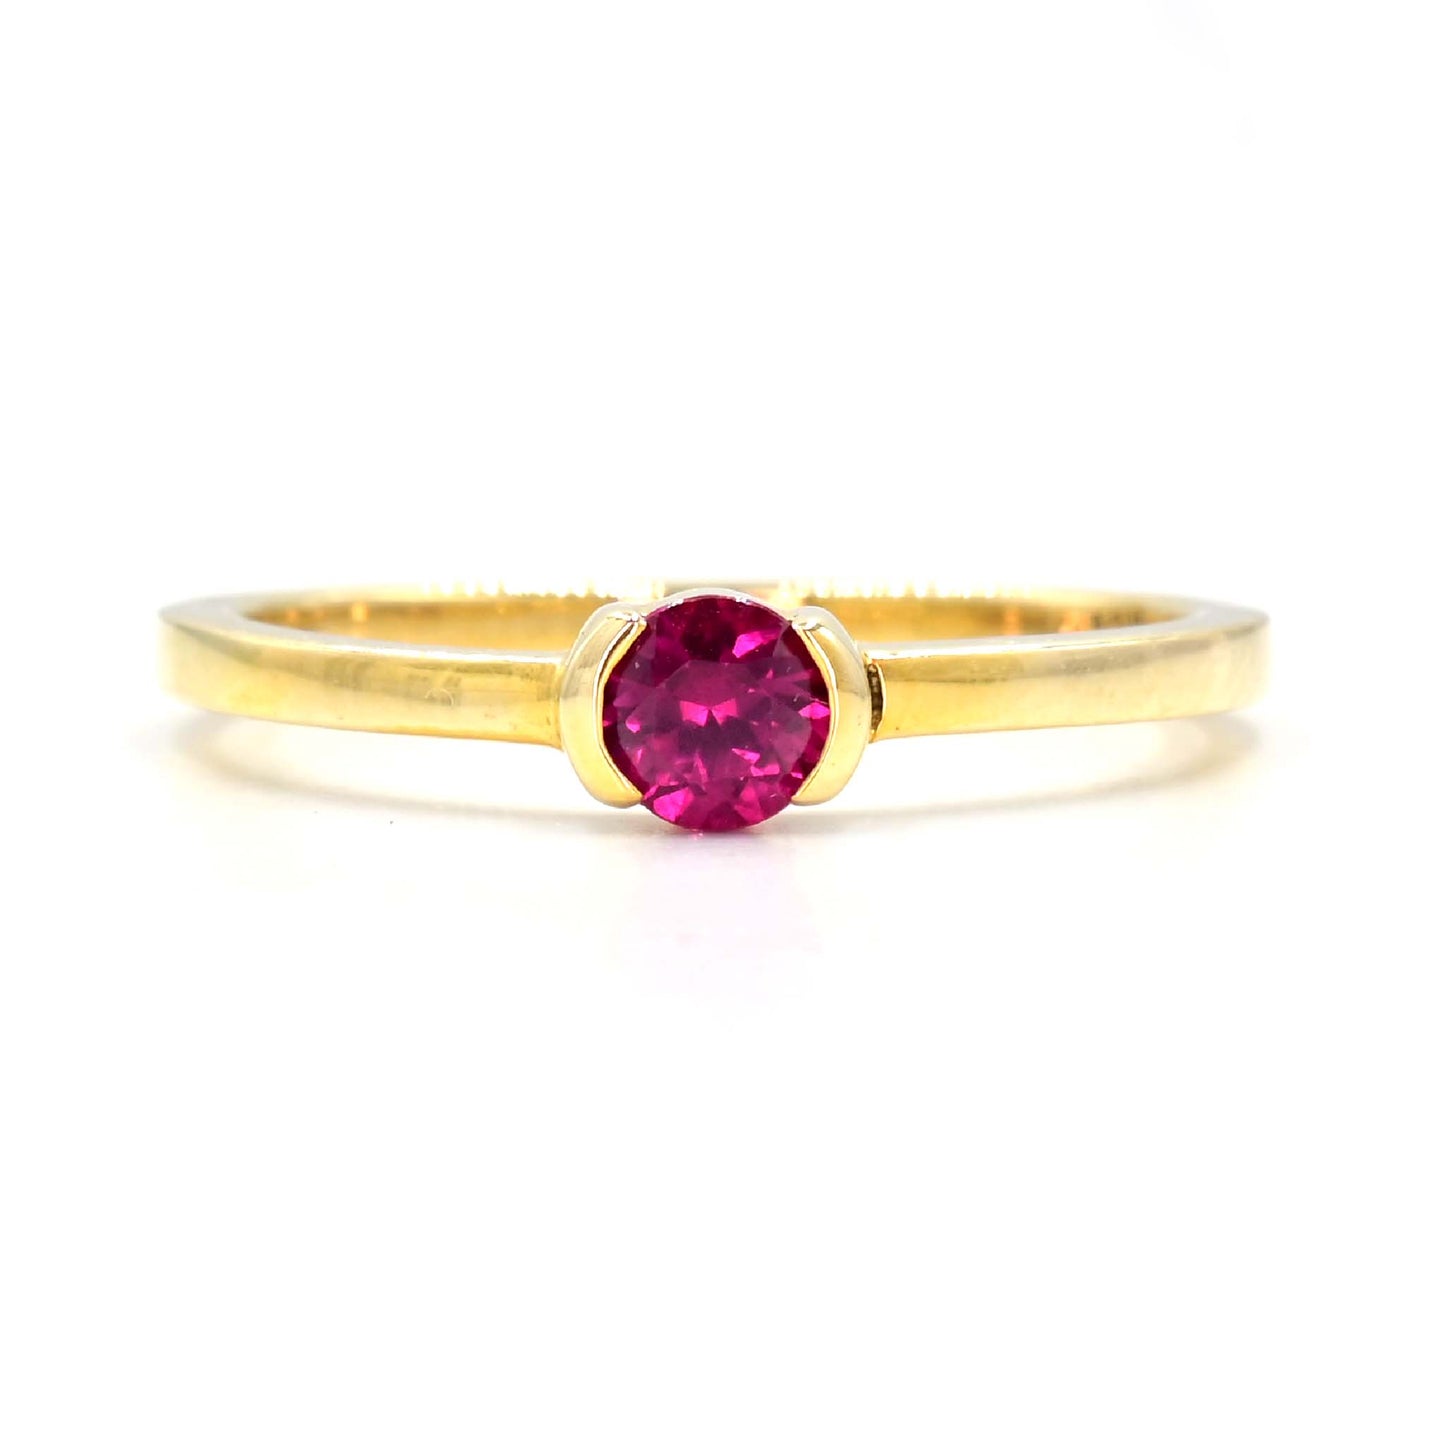 Stunning stack ring with ruby in 18k gold handmade in Chiang Mai, Thailand